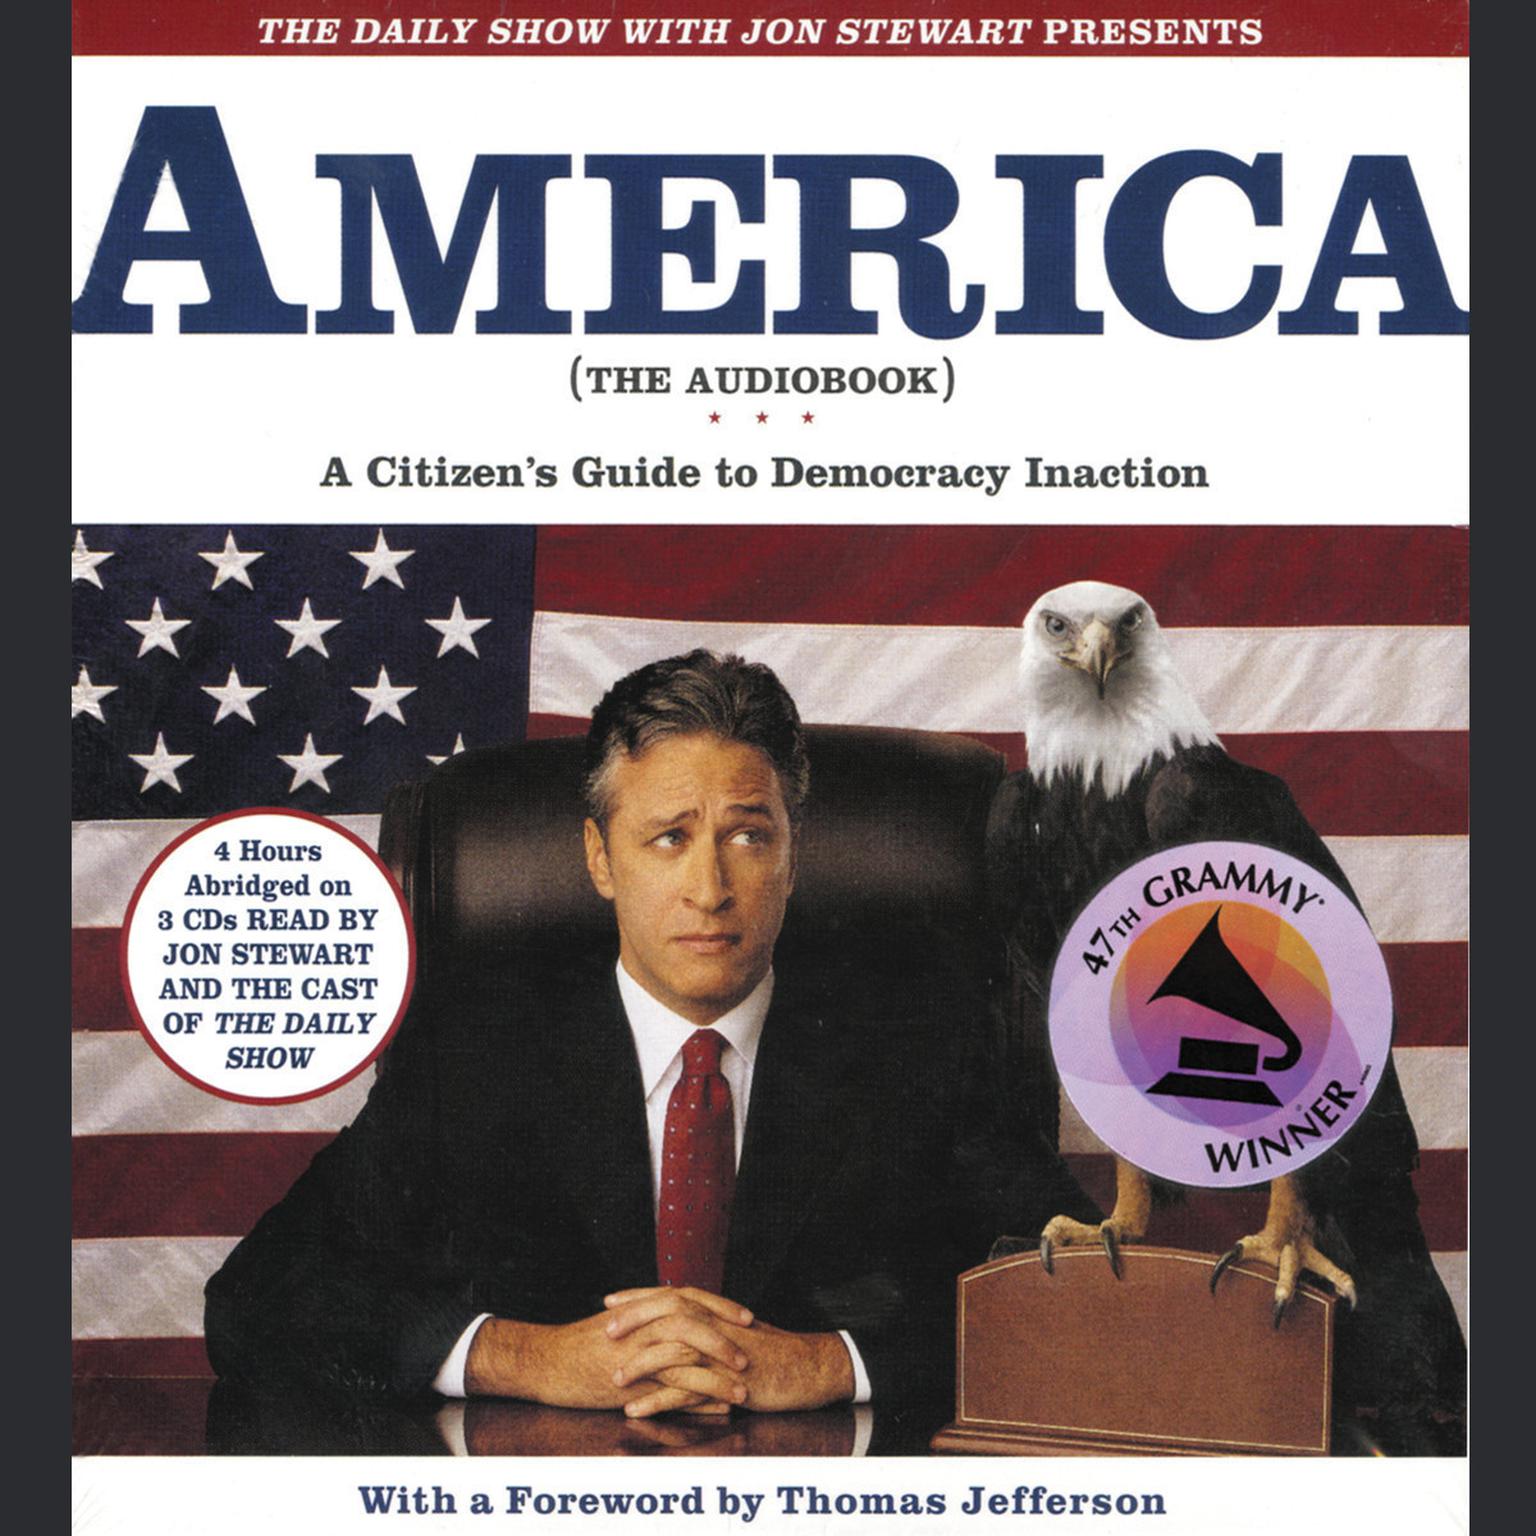 The Daily Show with Jon Stewart Presents America (The Audiobook) (Abridged): A Citizens Guide to Democracy Inaction Audiobook, by Jon Stewart